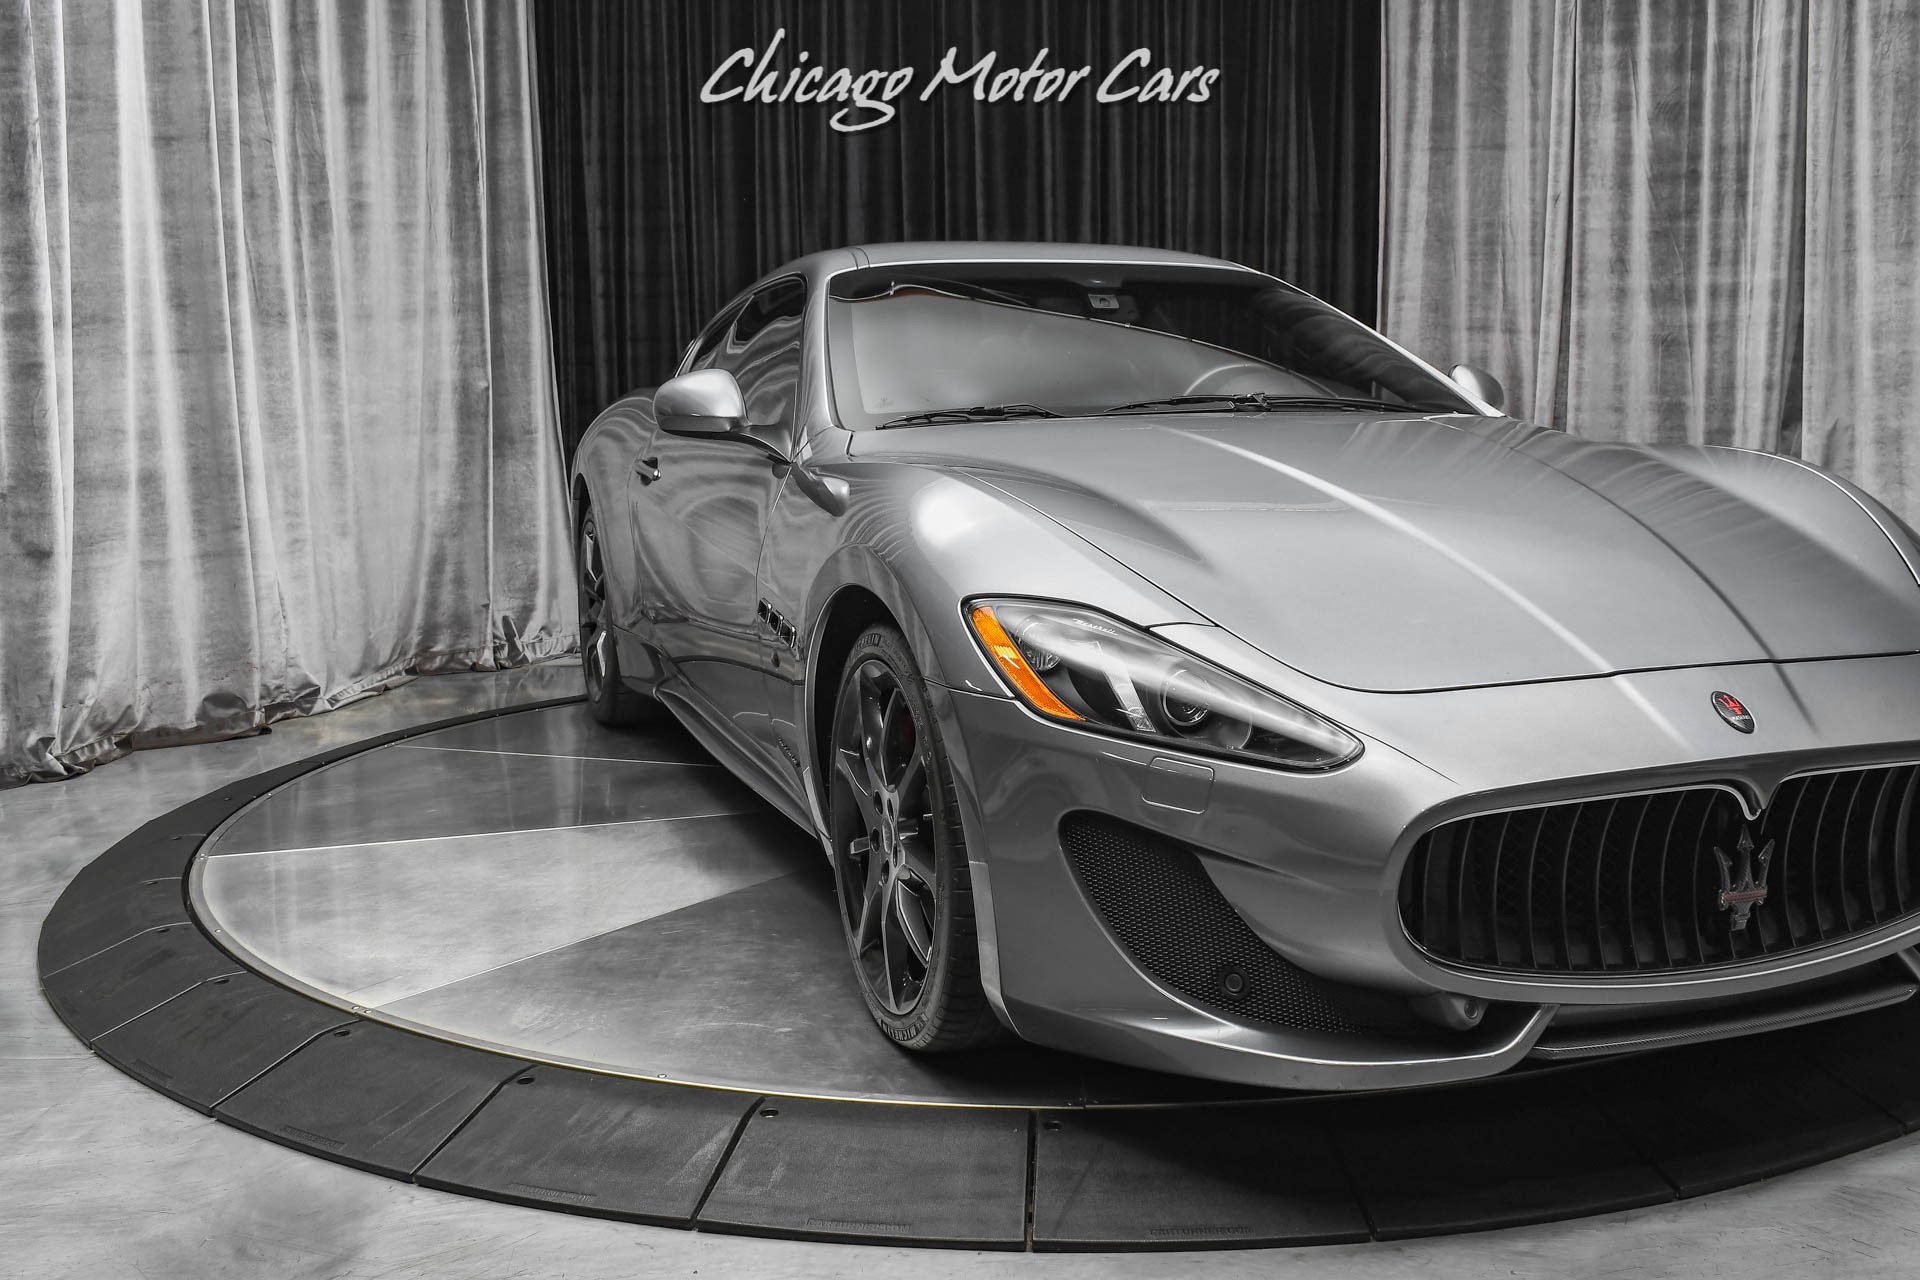 Used-2013-Maserati-GranTurismo-Sport-Coupe-Loaded-with-Carbon-Fiber-16k-Miles-Black-Leather-with-Red-St